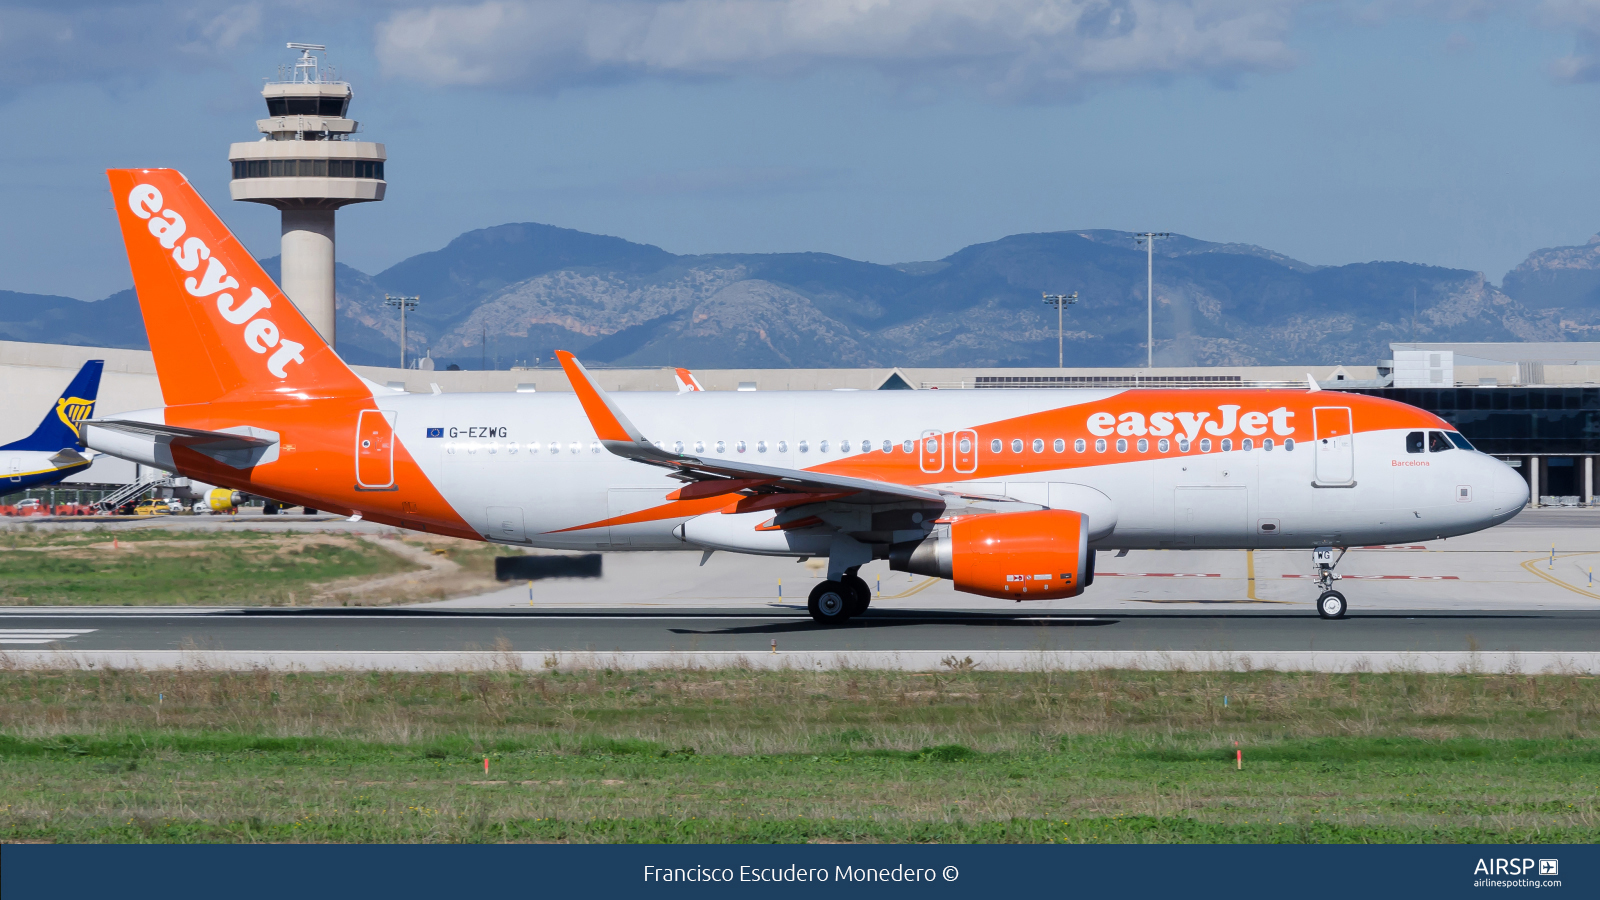 Easyjet  Airbus A320  G-EZWG